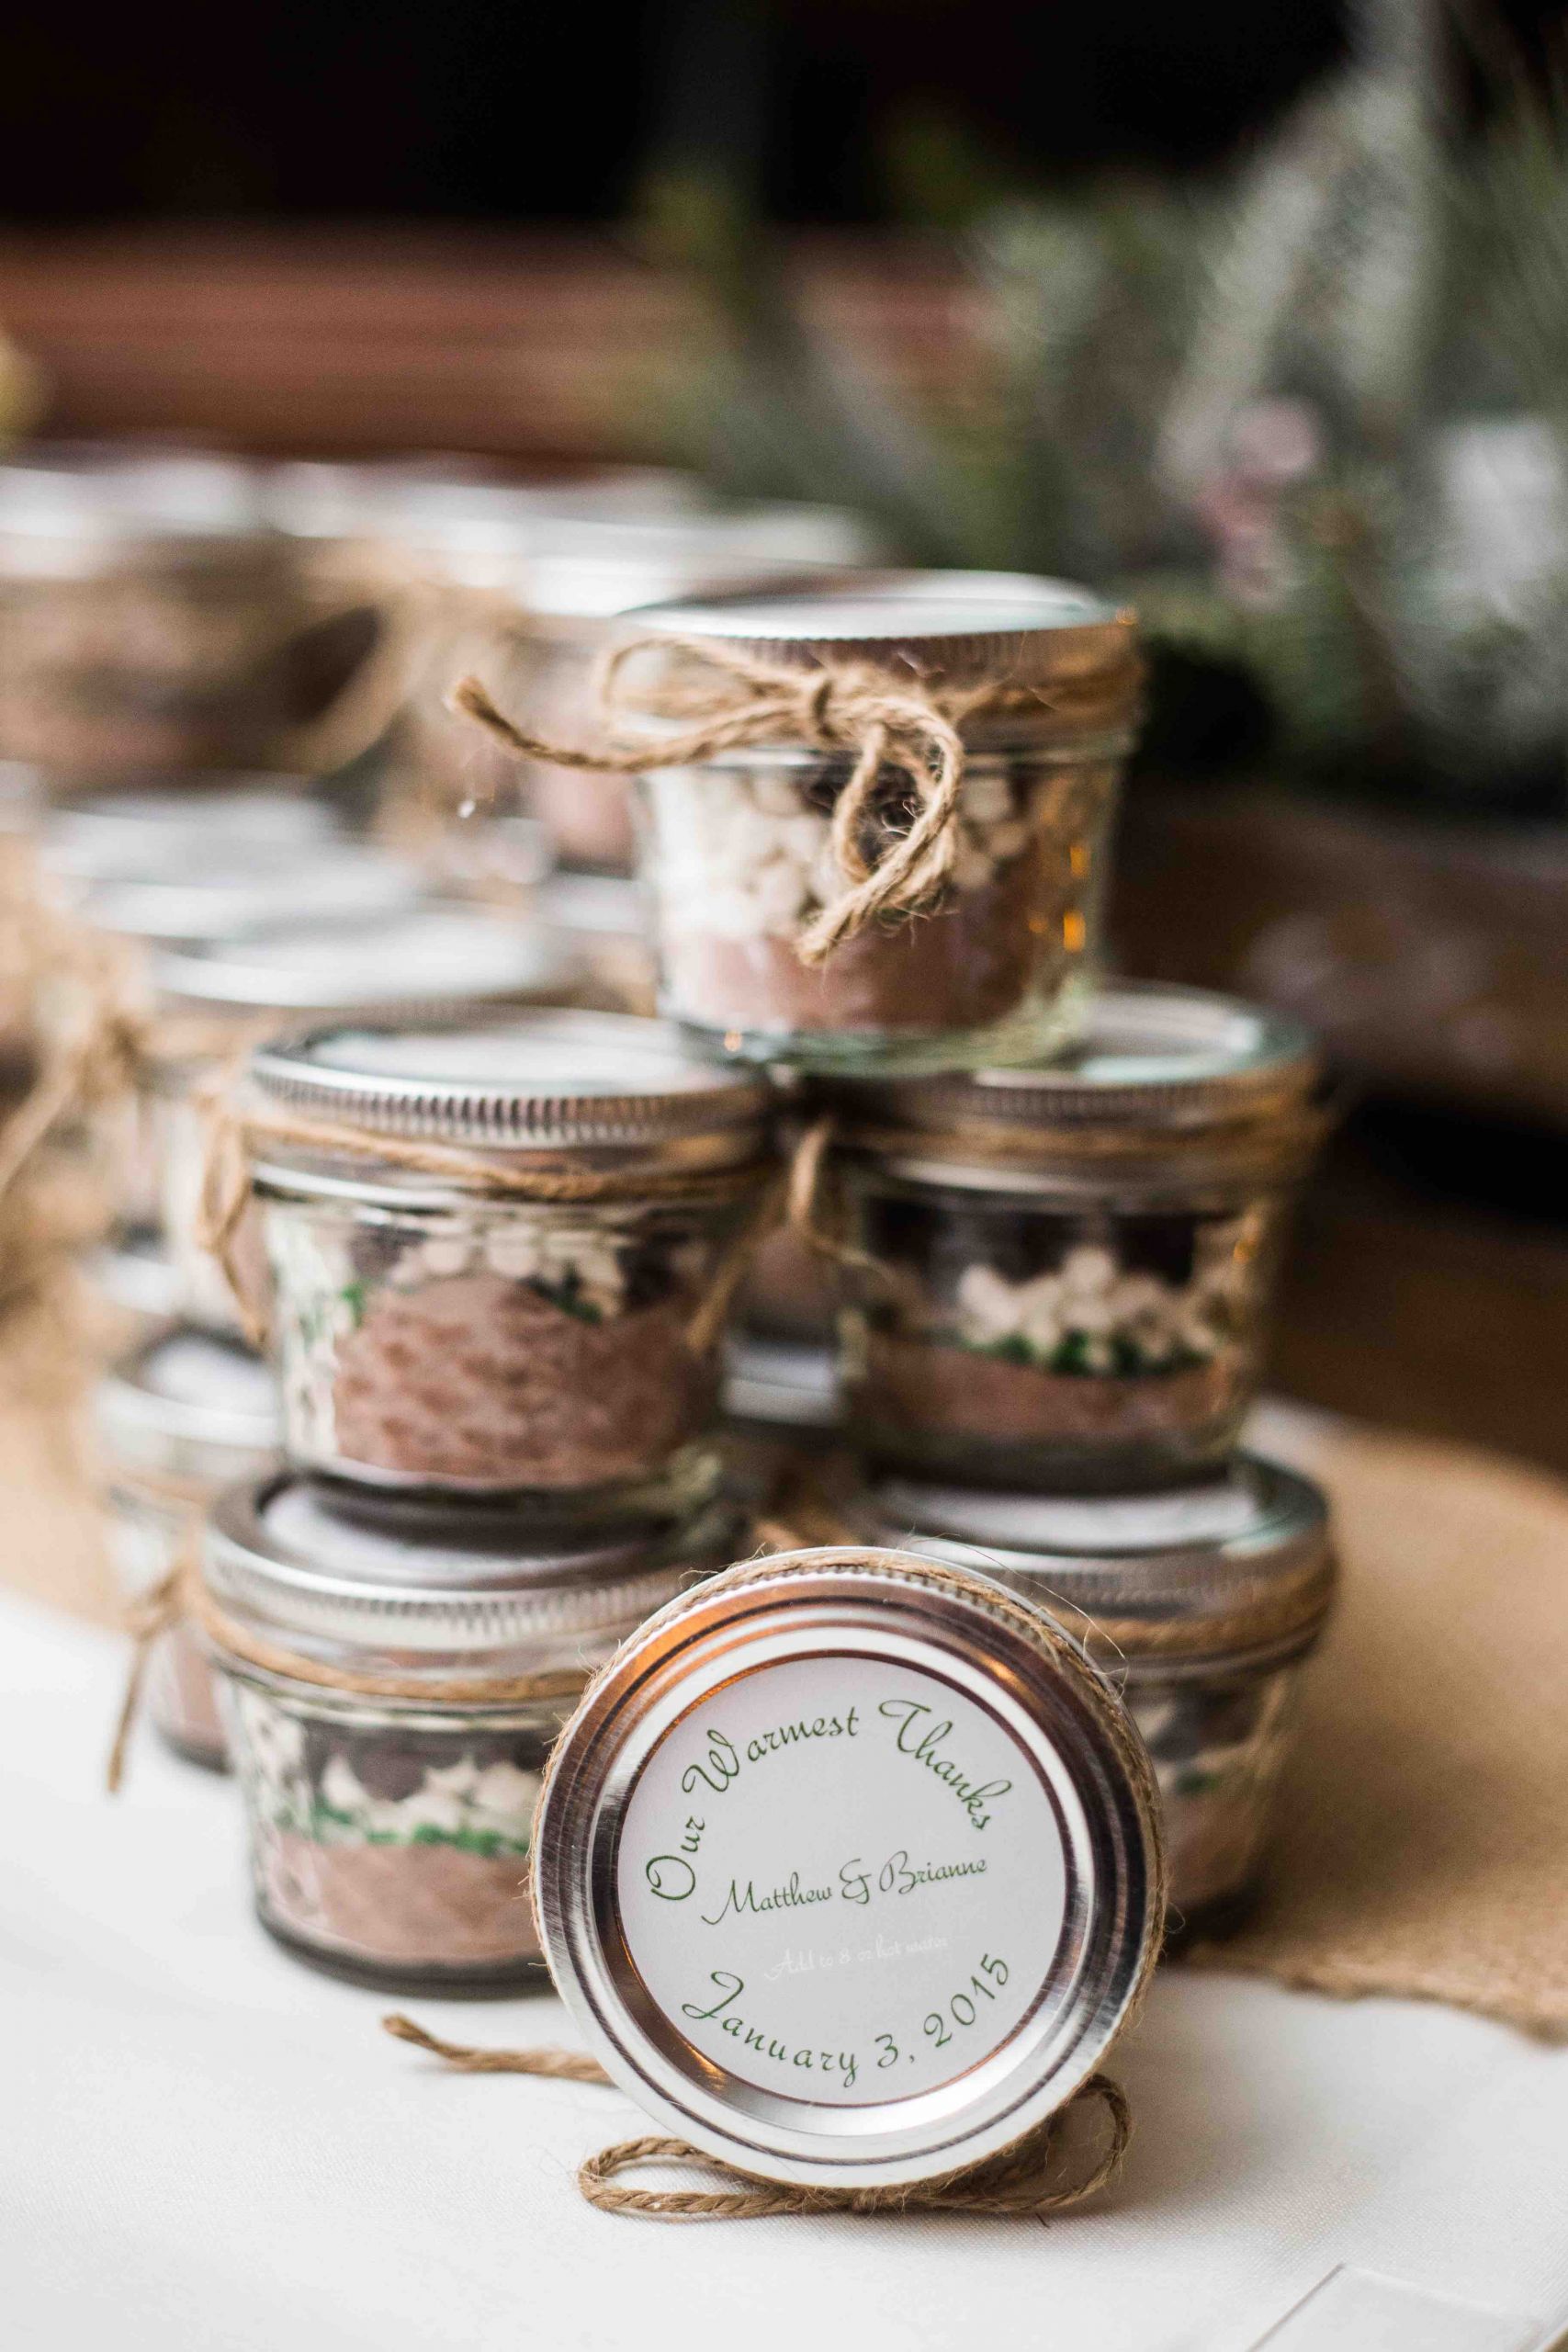 DIY Hot Chocolate Wedding Favors
 "Our Warmest Thanks" Wedding favors Hot Chocolate in mason